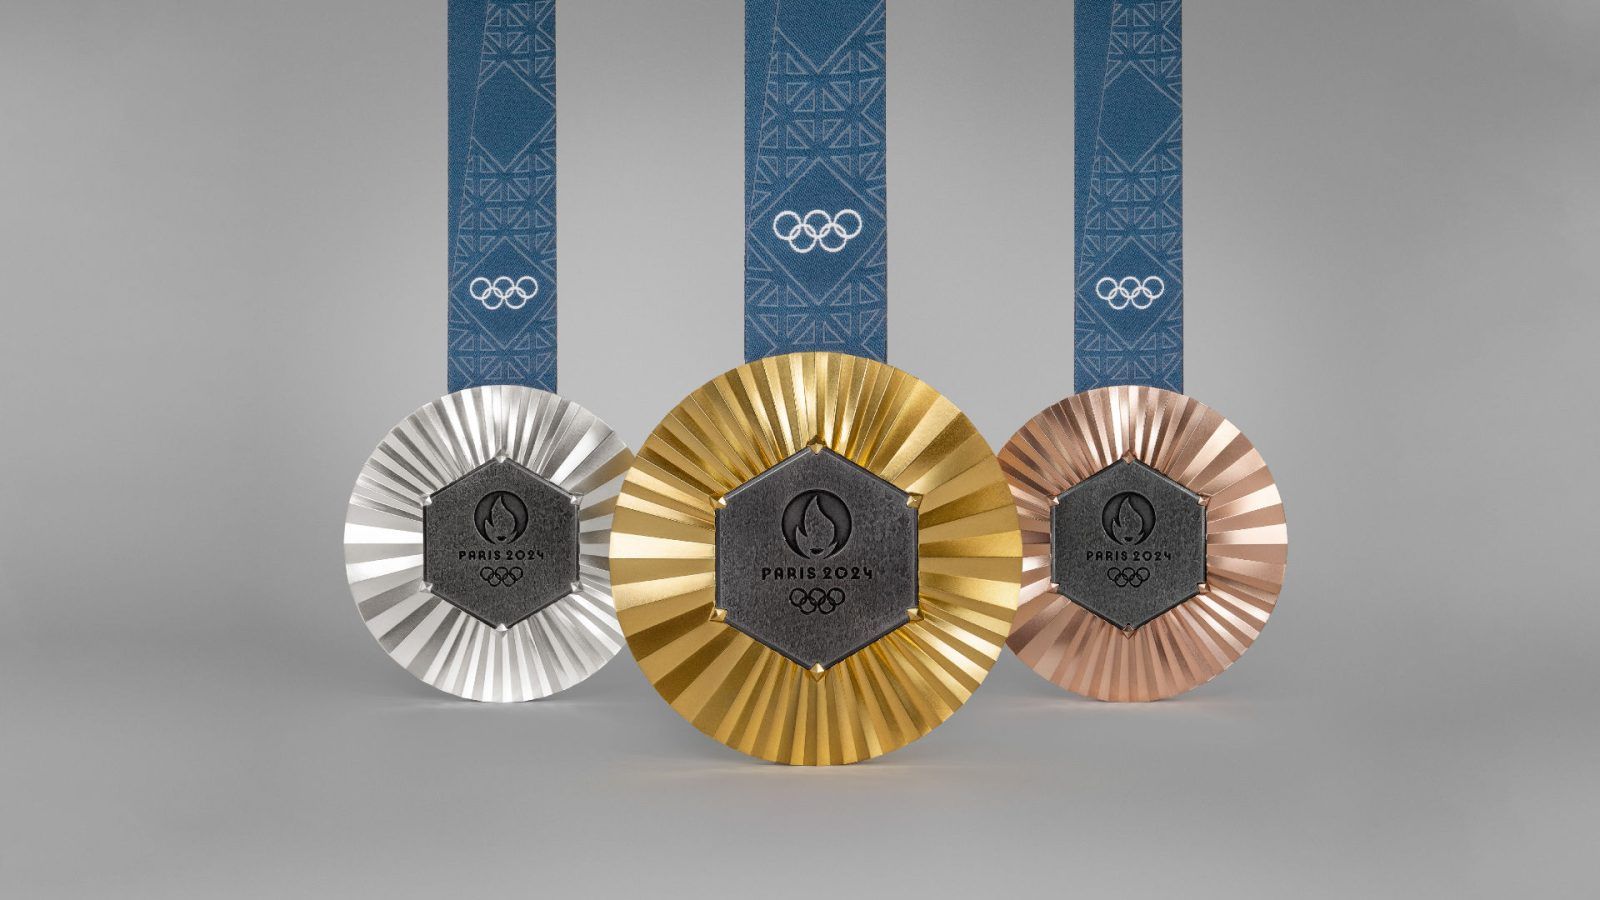 All About Paris Olympics Medals Featuring Chunks Of Eiffel Tower